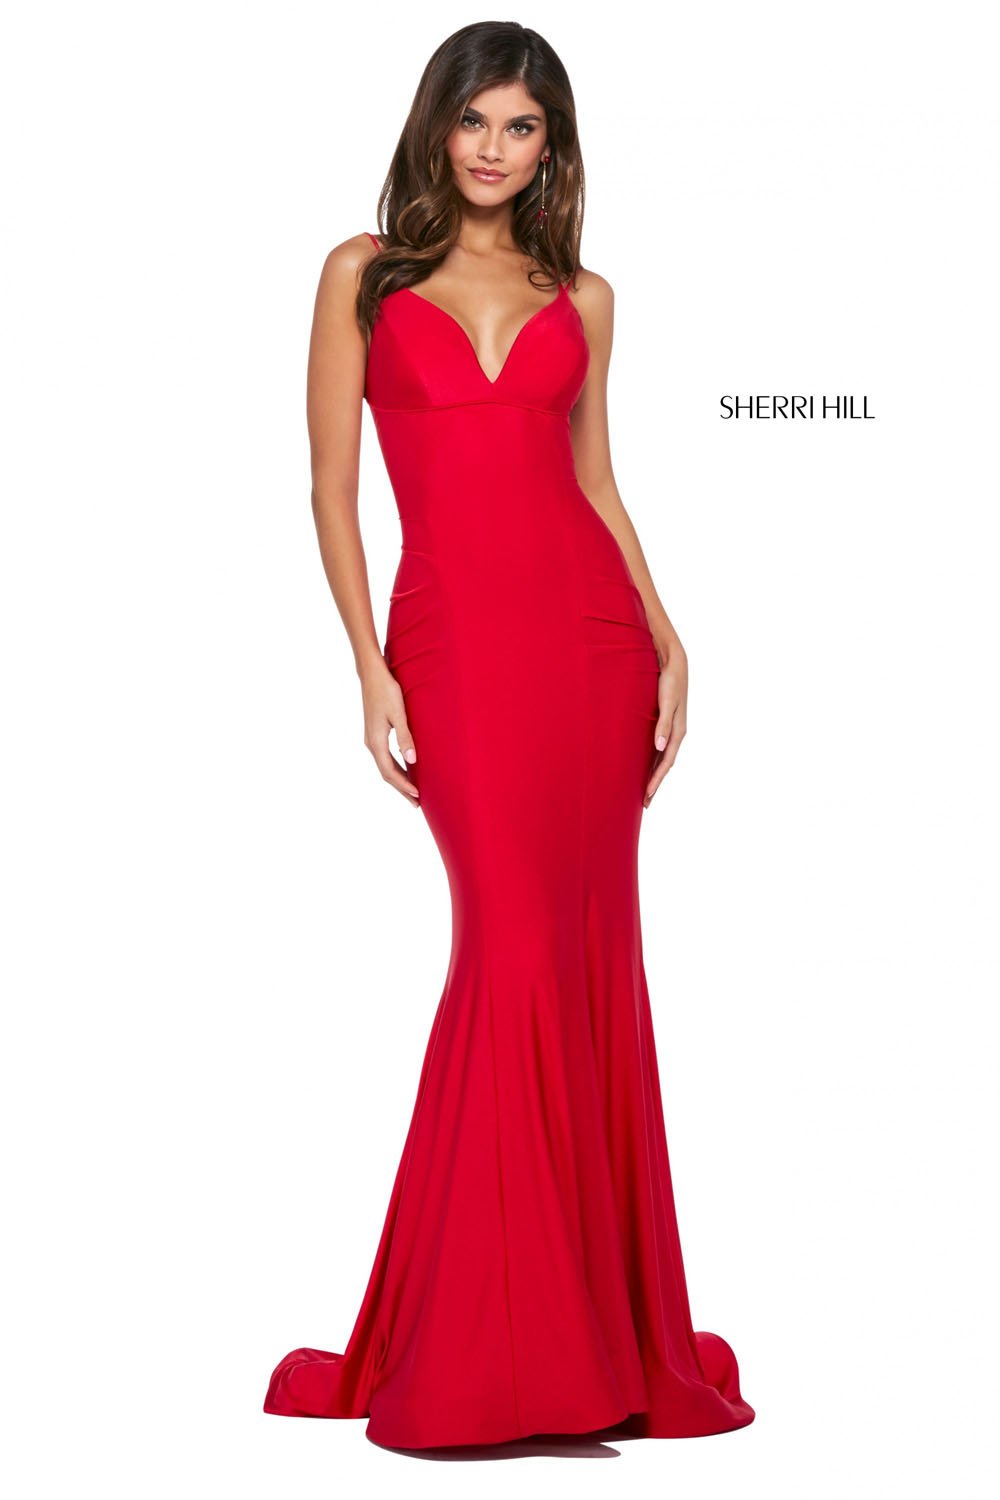 Sherri Hill 53434 dress images in these colors: Fuchsia, Black, Turquoise, Wine, Purple, Royal, Red, Emerald.